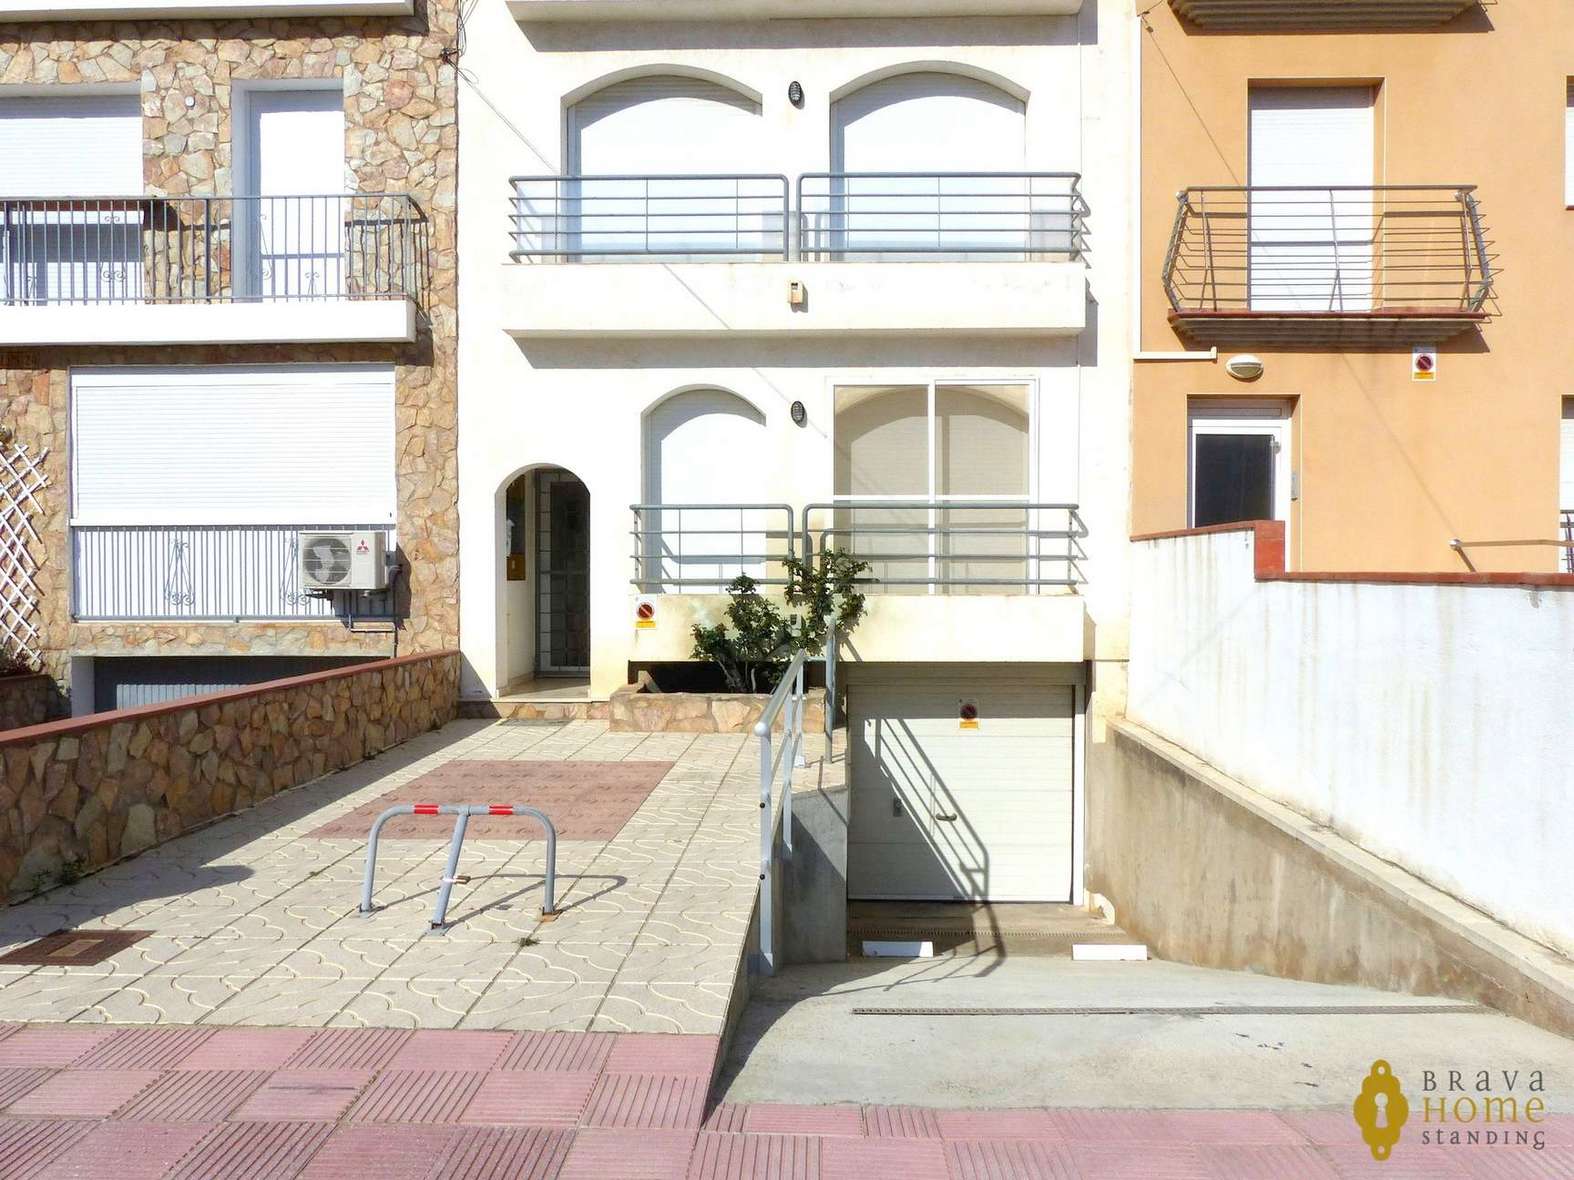 APARTMENT CLOSE TO THE BEACH WITH CANAL VIEW FOR SALE IN EMPURIABRAVA